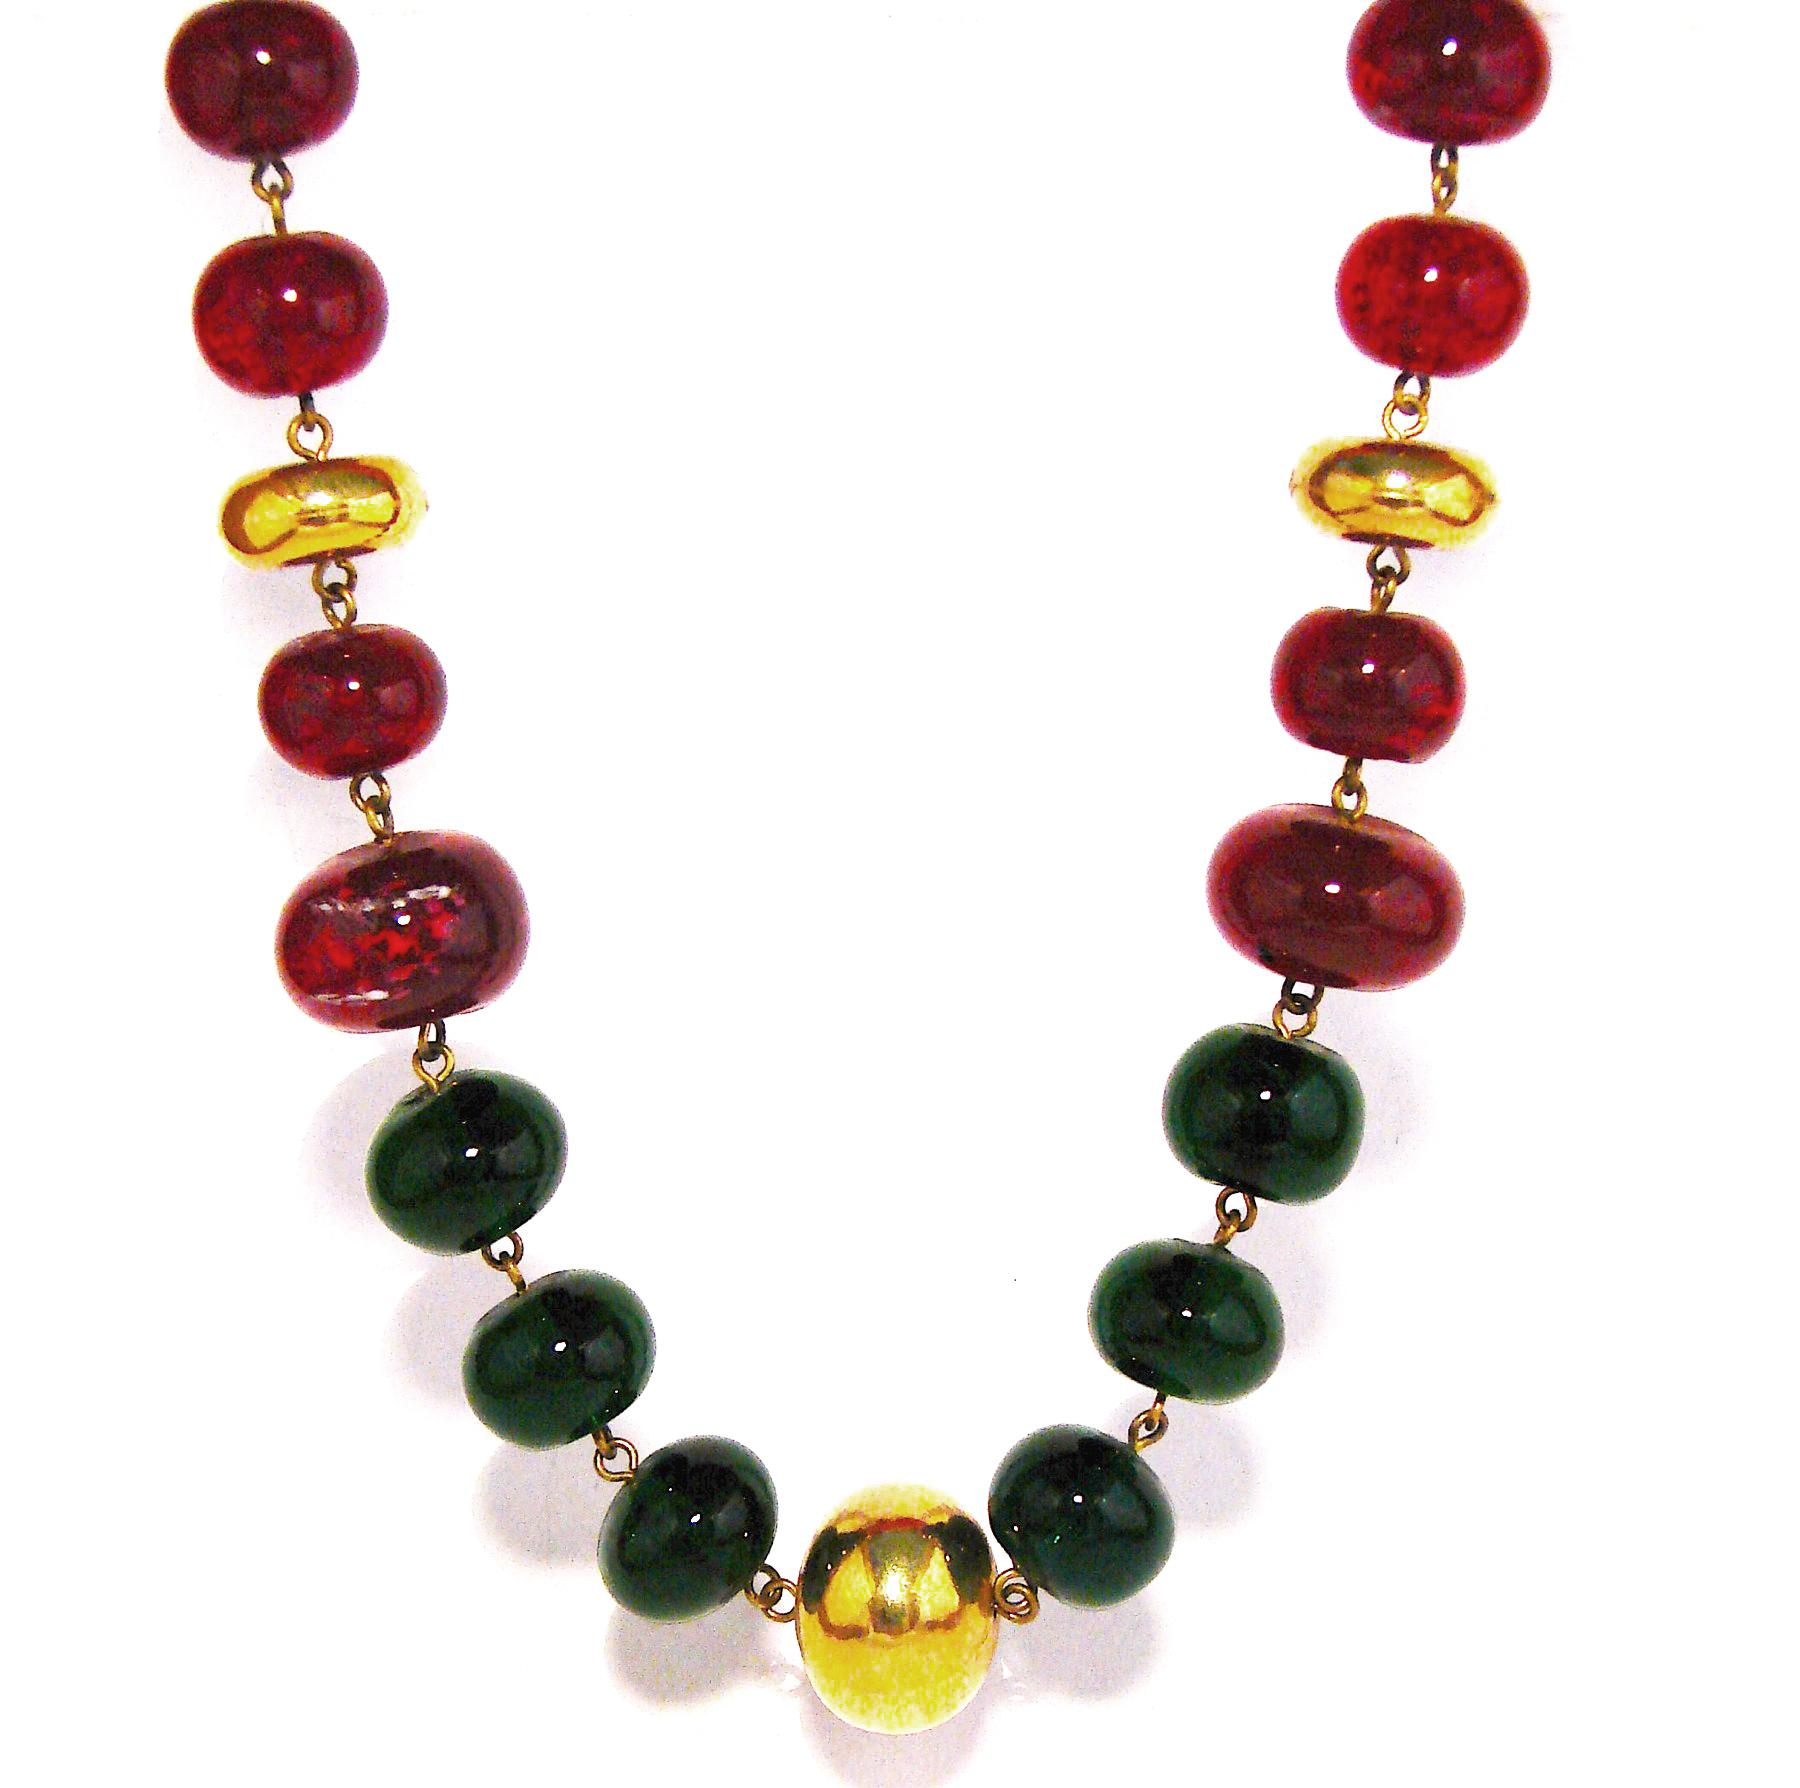 Vintage Chanel Beaded Necklace Red & Green Poured Glass Goossens 1970s  3